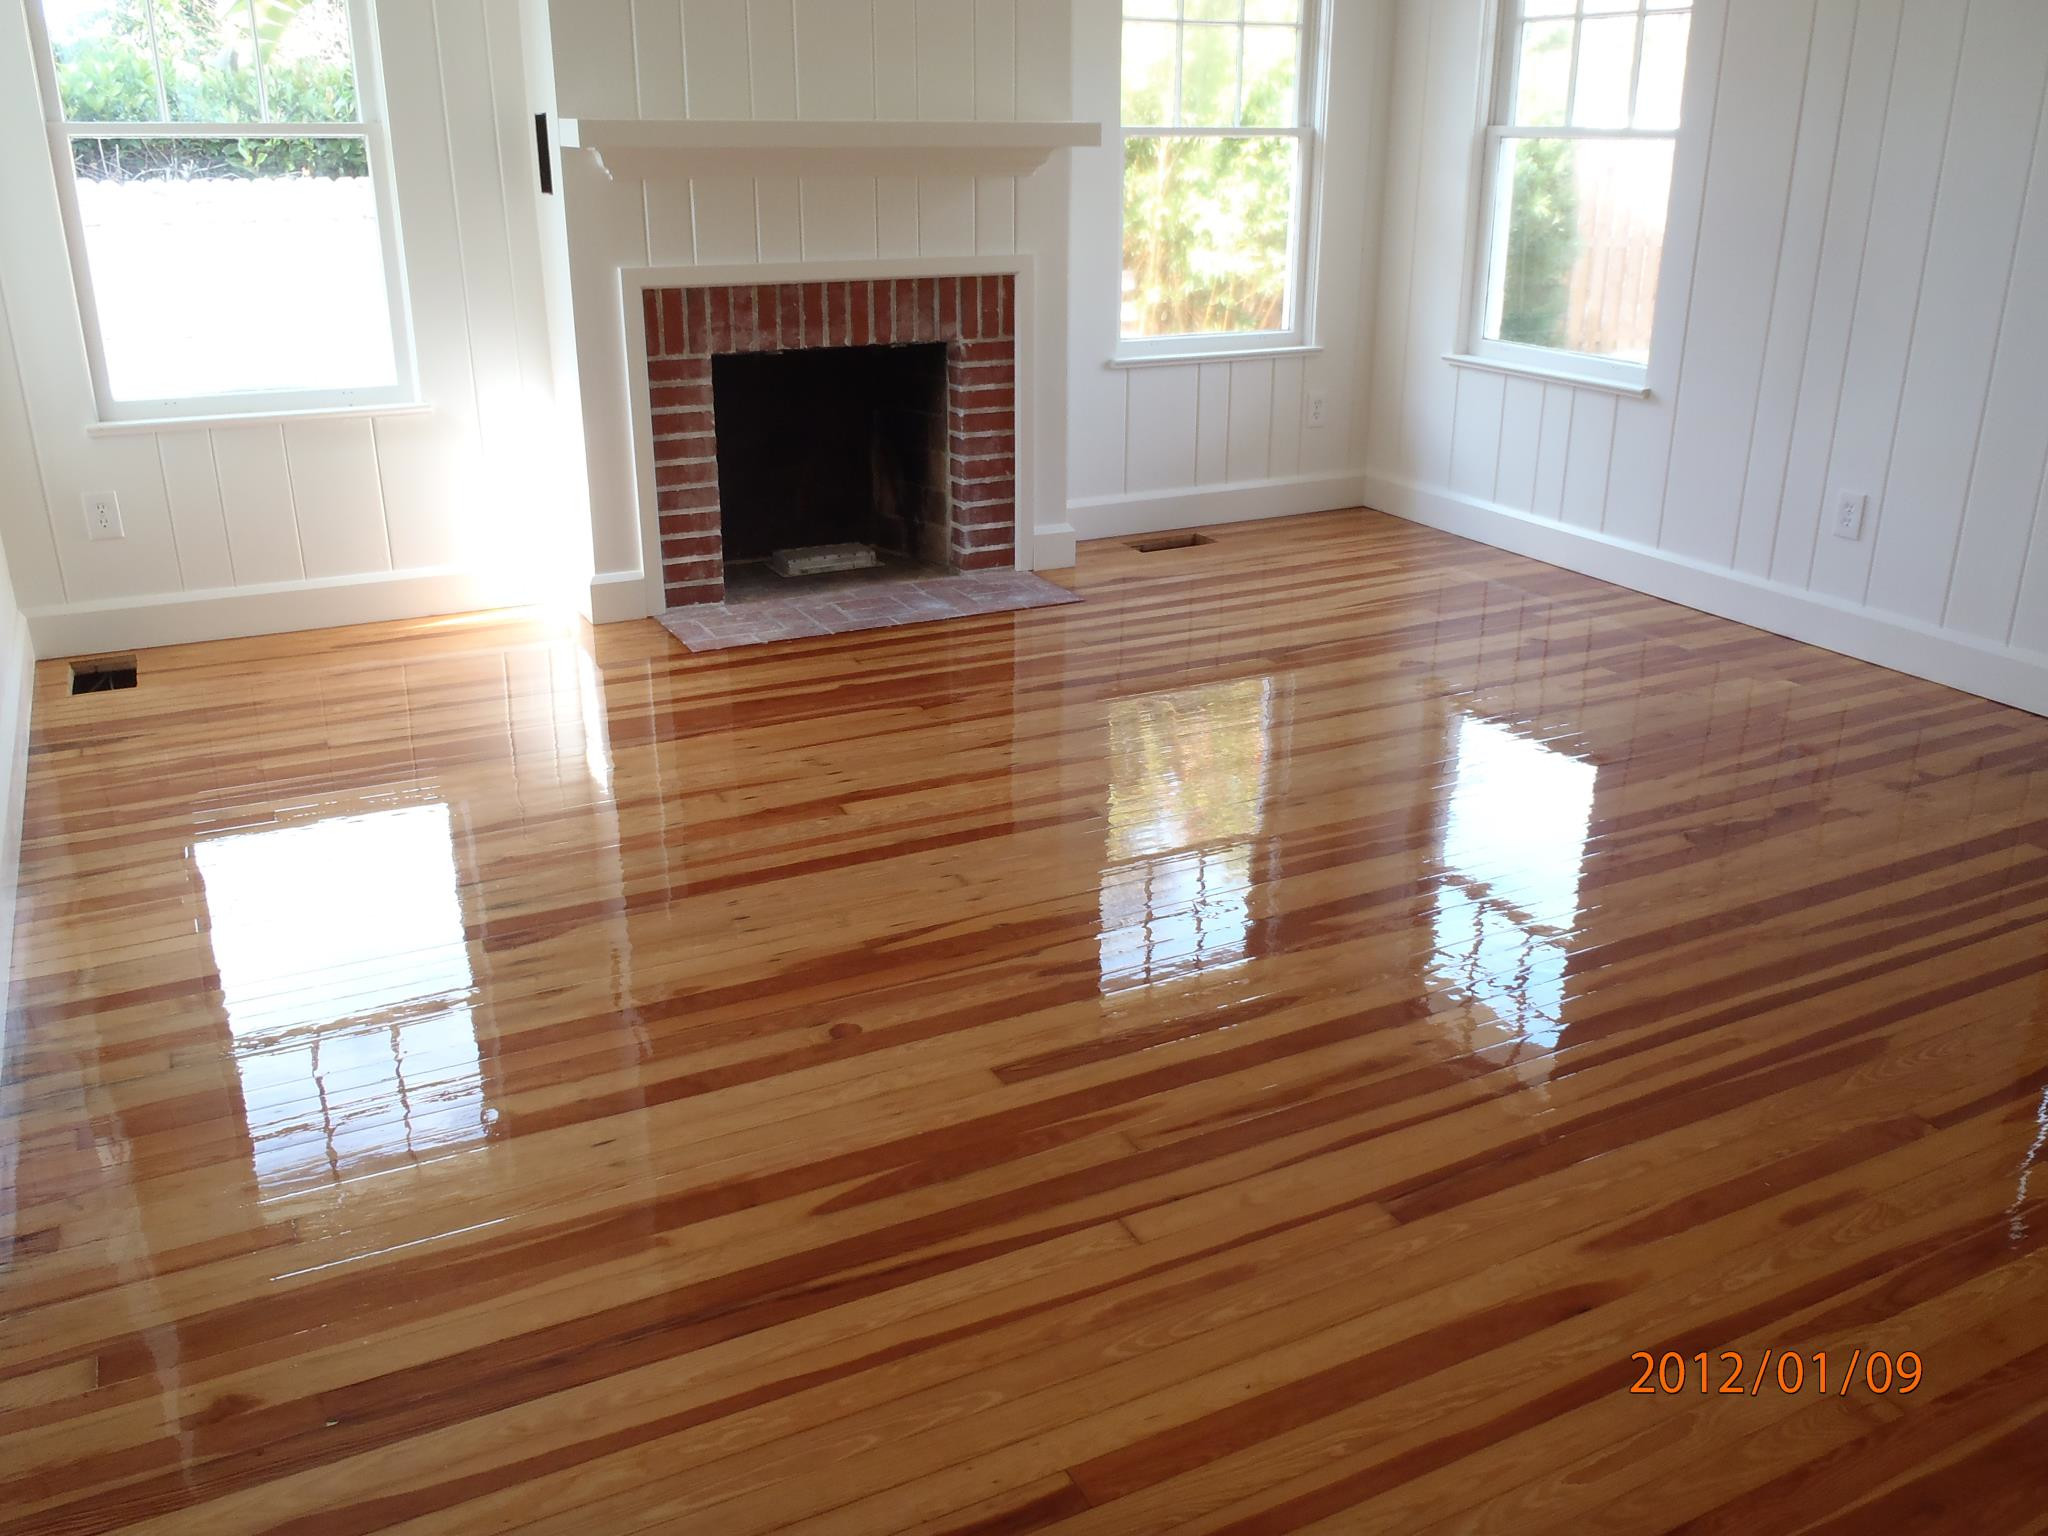 14 Lovely How Much to Refinish Hardwood Floors Yourself 2023 free download how much to refinish hardwood floors yourself of how much to refinish hardwood floors adventures in staining my red intended for how much to refinish hardwood floors best how to refinish har